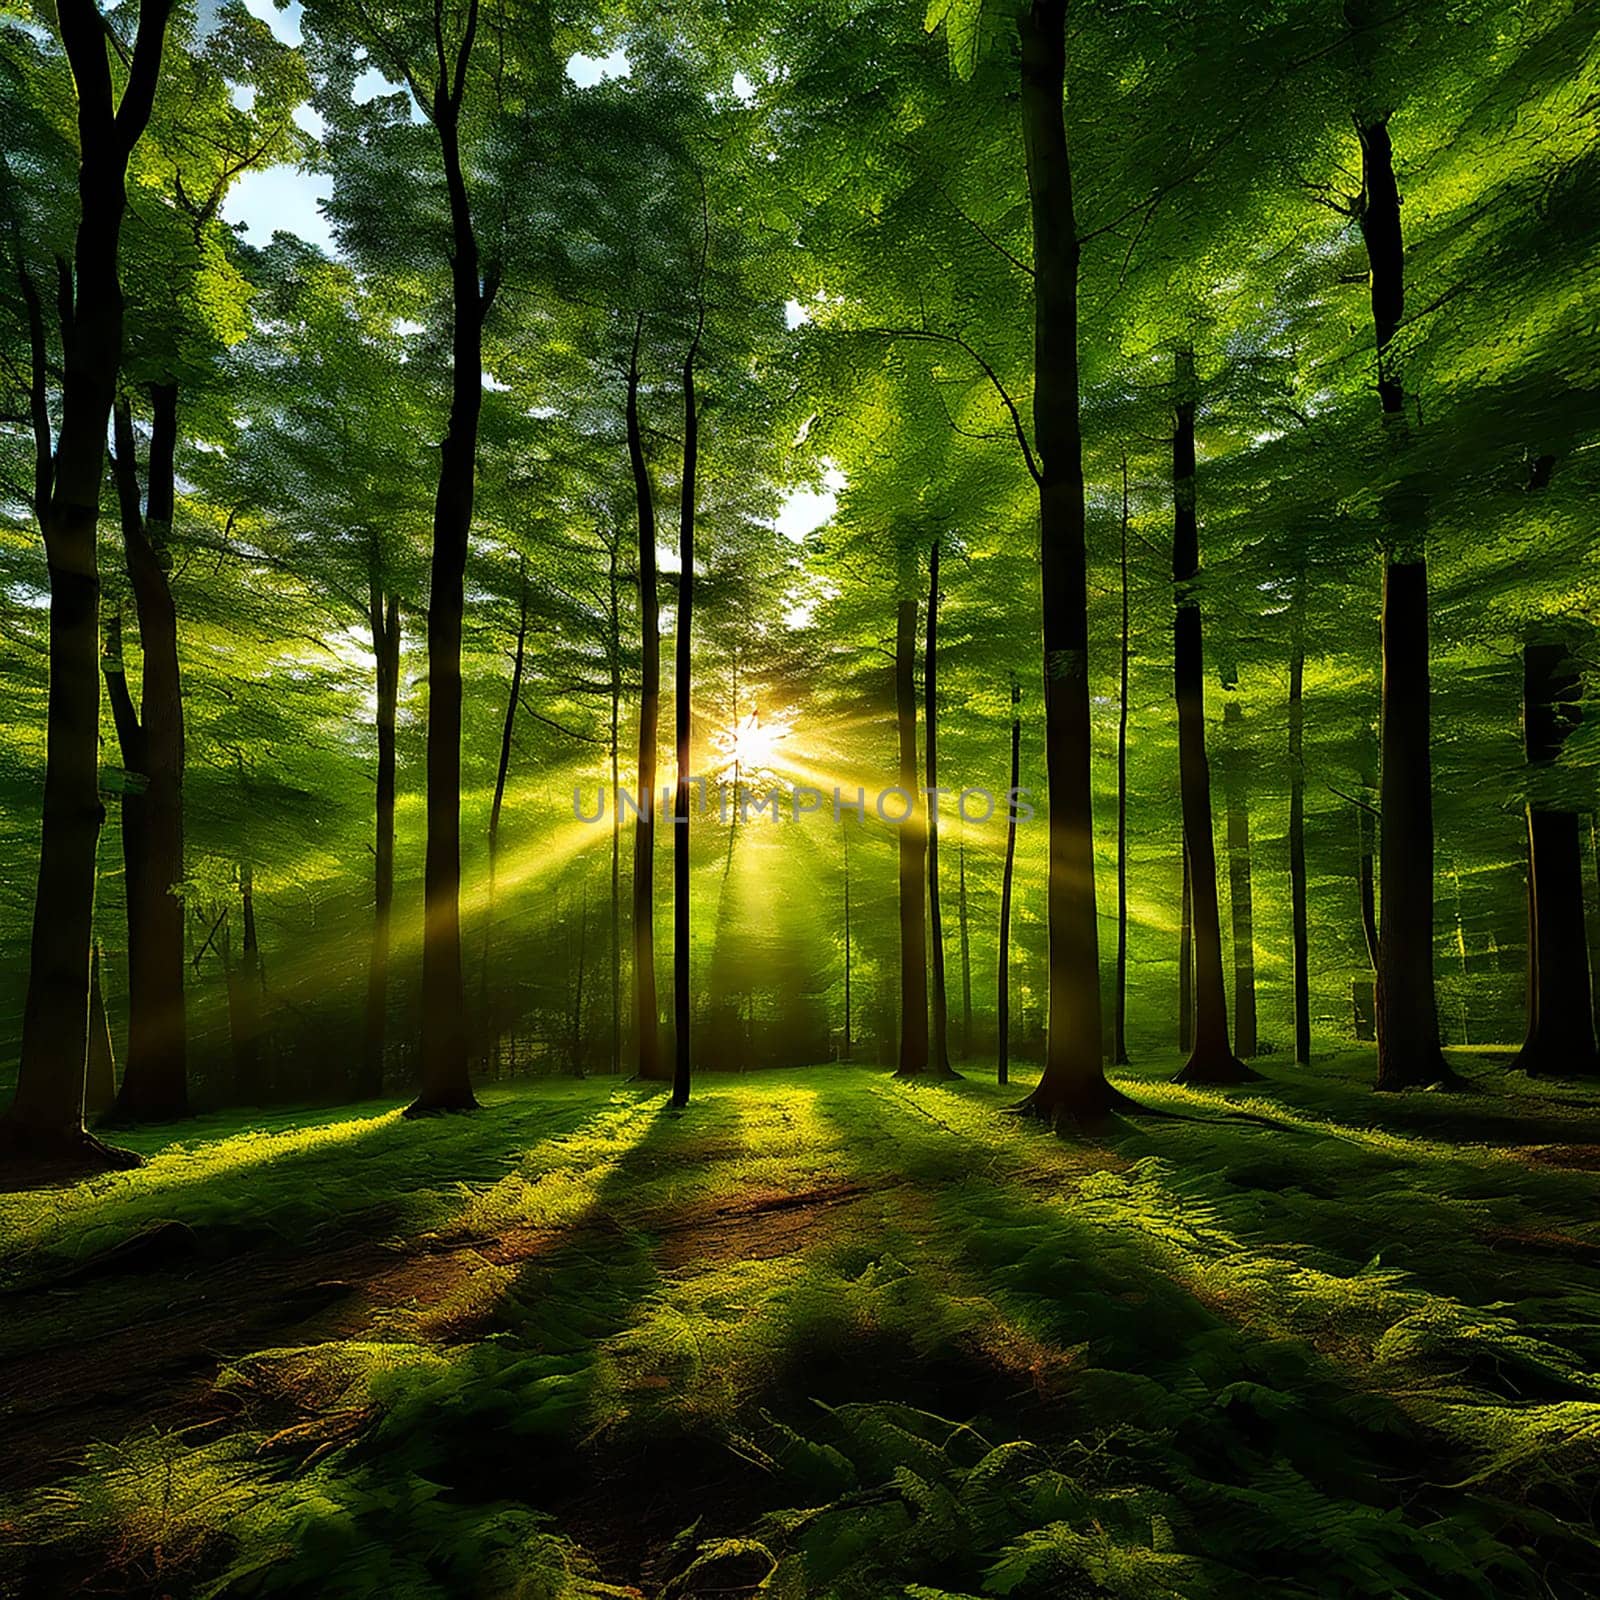 Sunlit Serenity: Panoramic View of a Forest Bathed in Sunlight